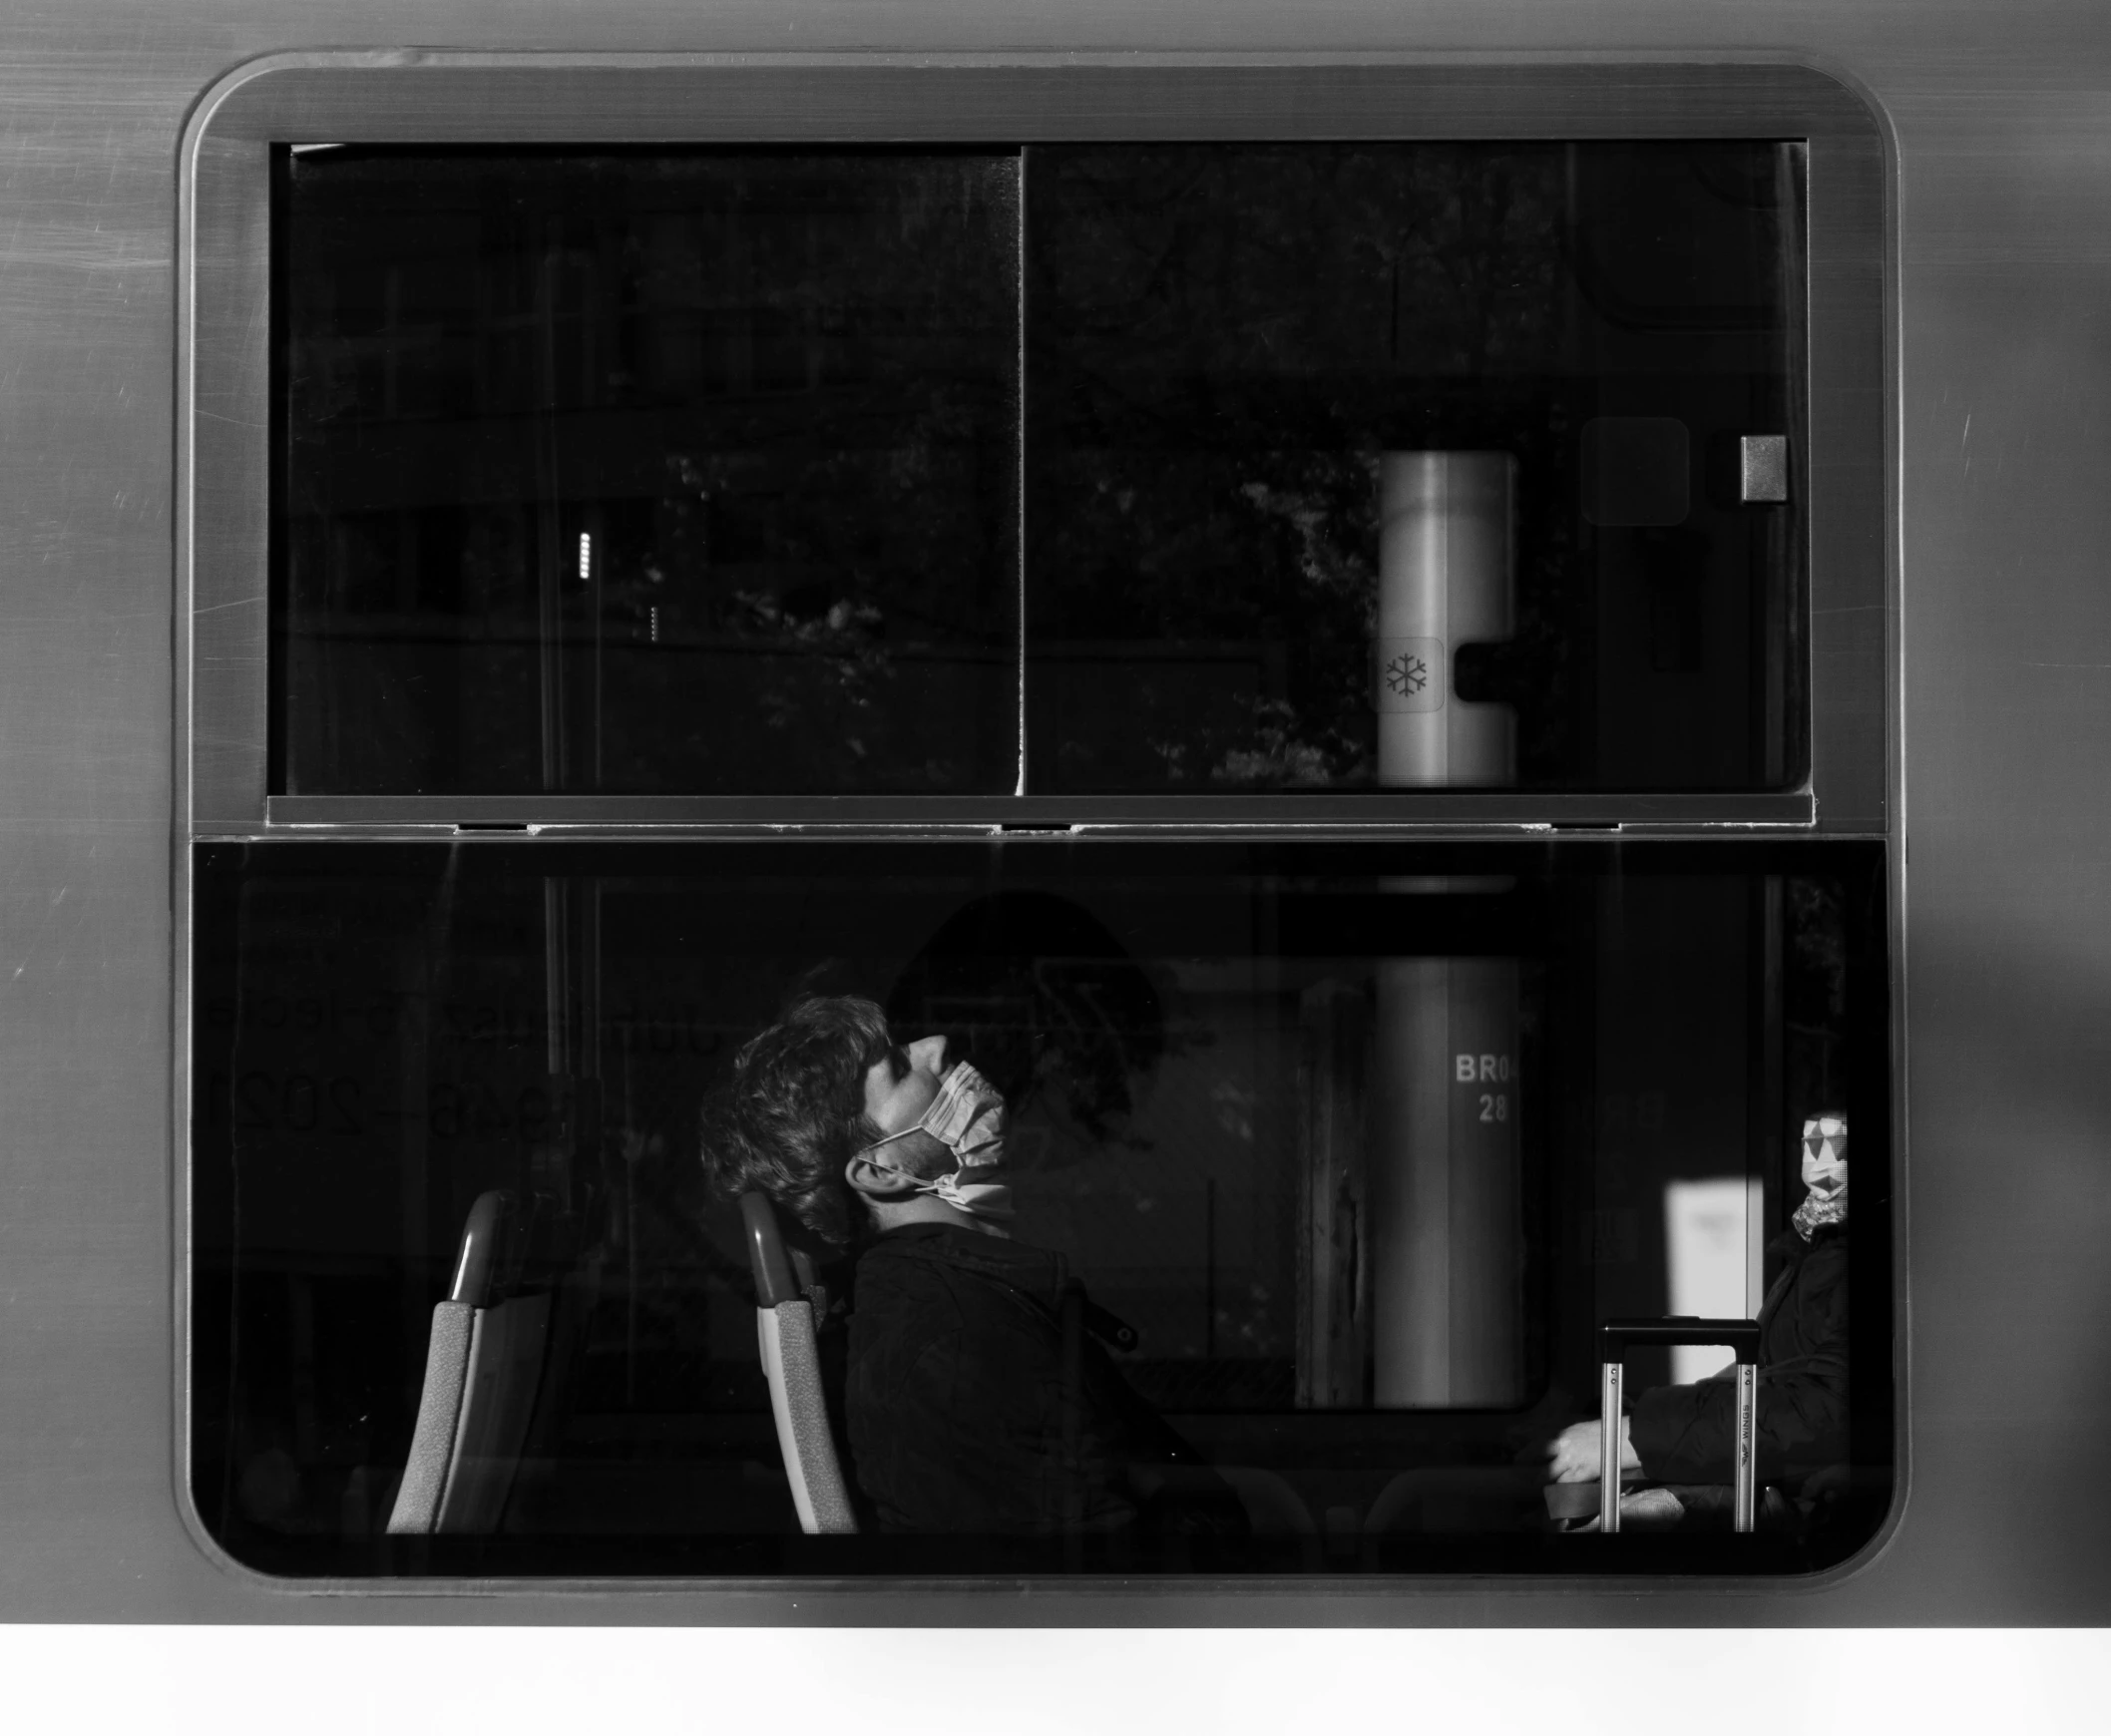 a black and white photo of a woman looking out a window, a black and white photo, by Jan Rustem, view from a news truck, kissing, desk, capsule hotel